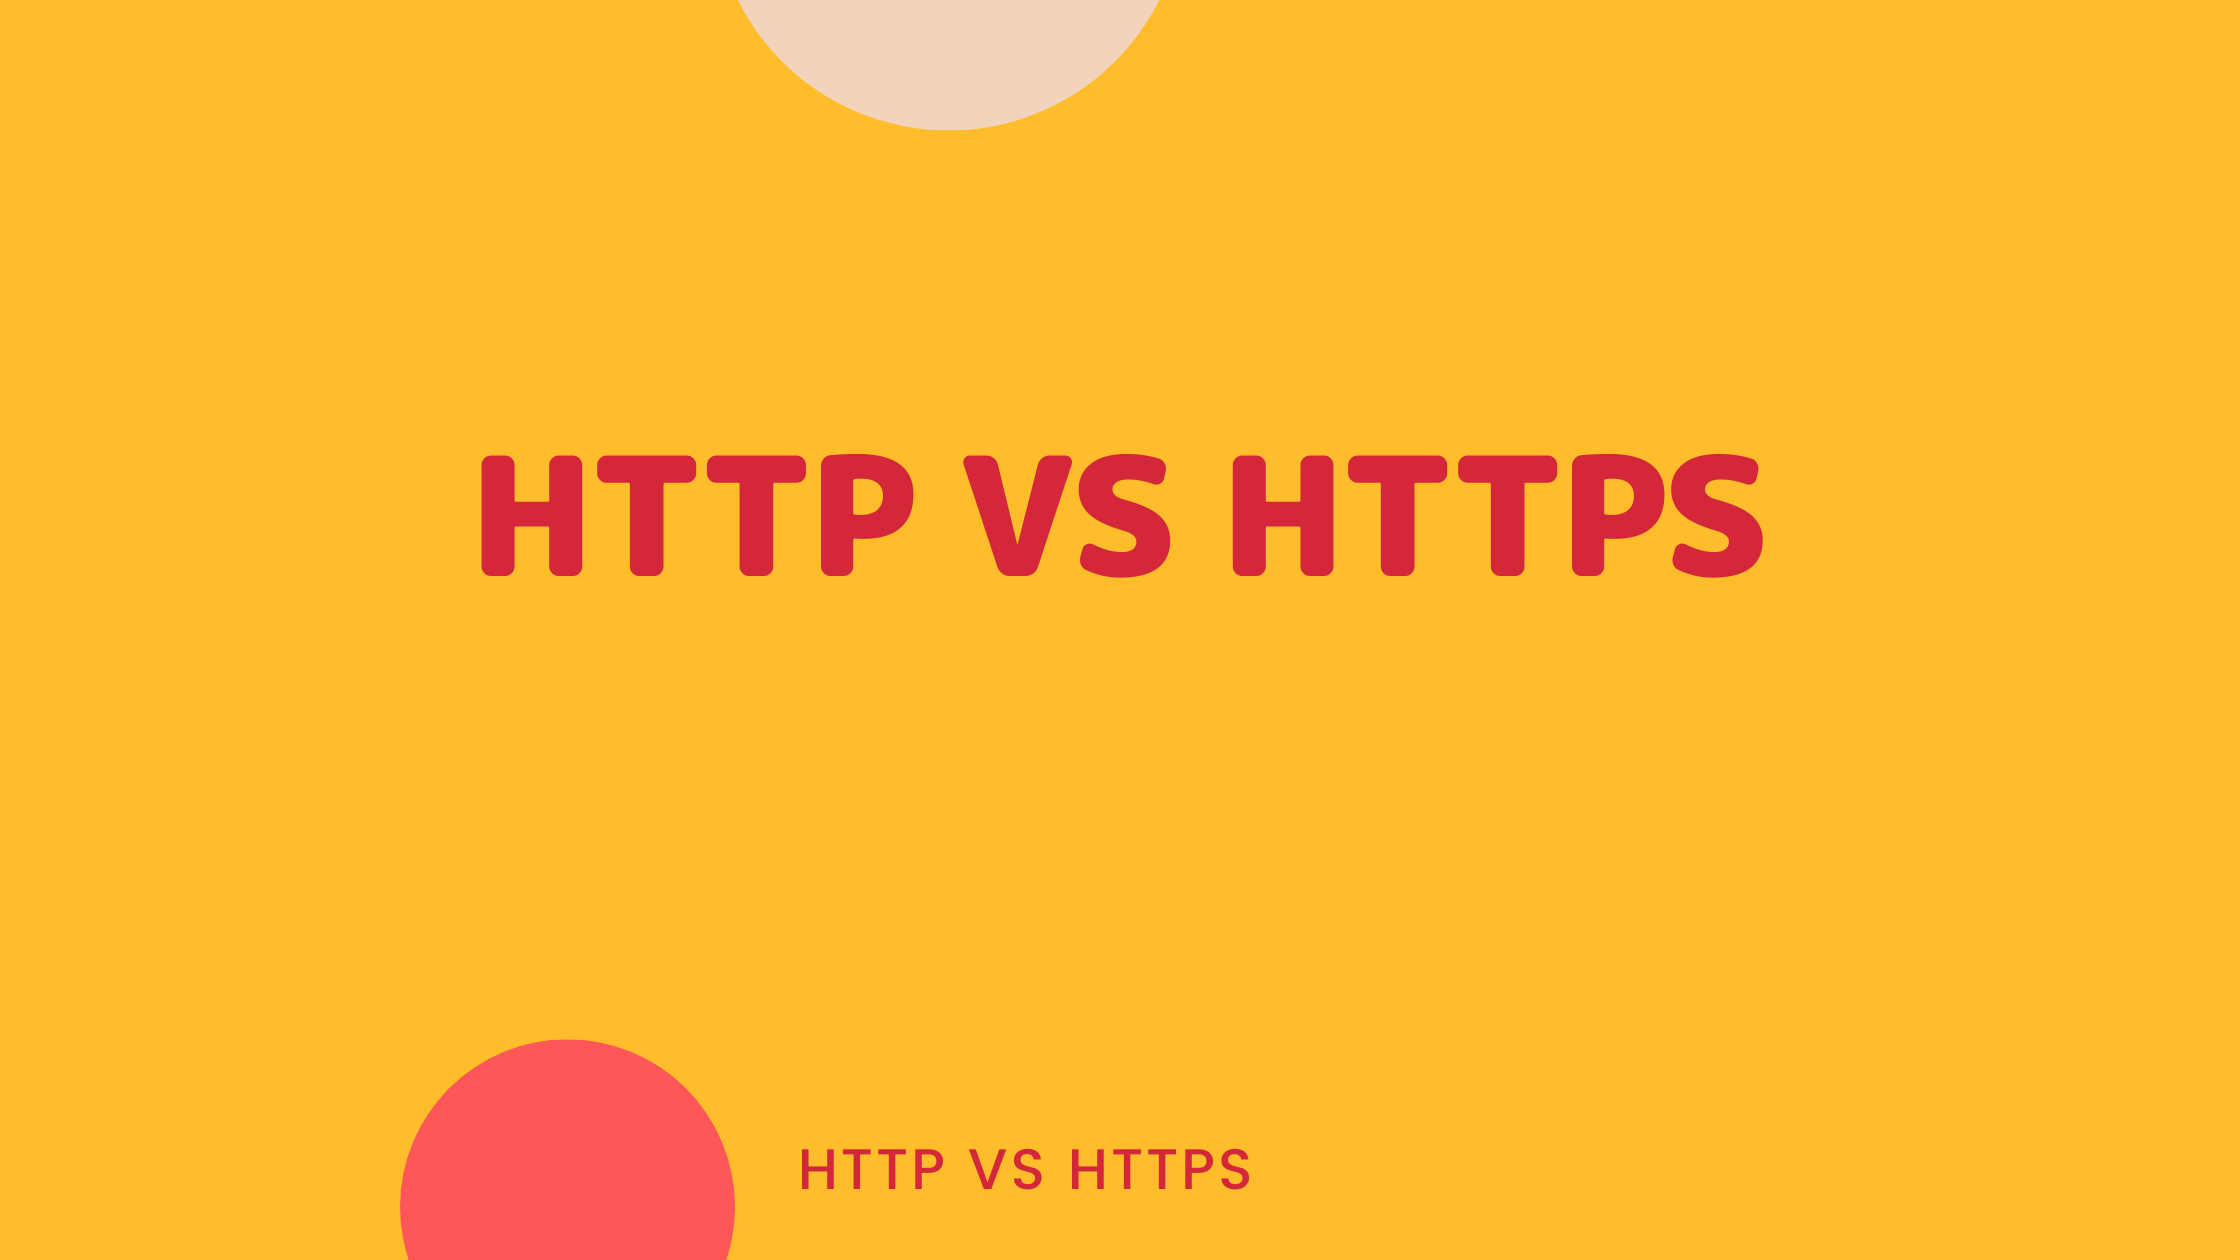 HTTP vs HTTPS – What's the Difference?